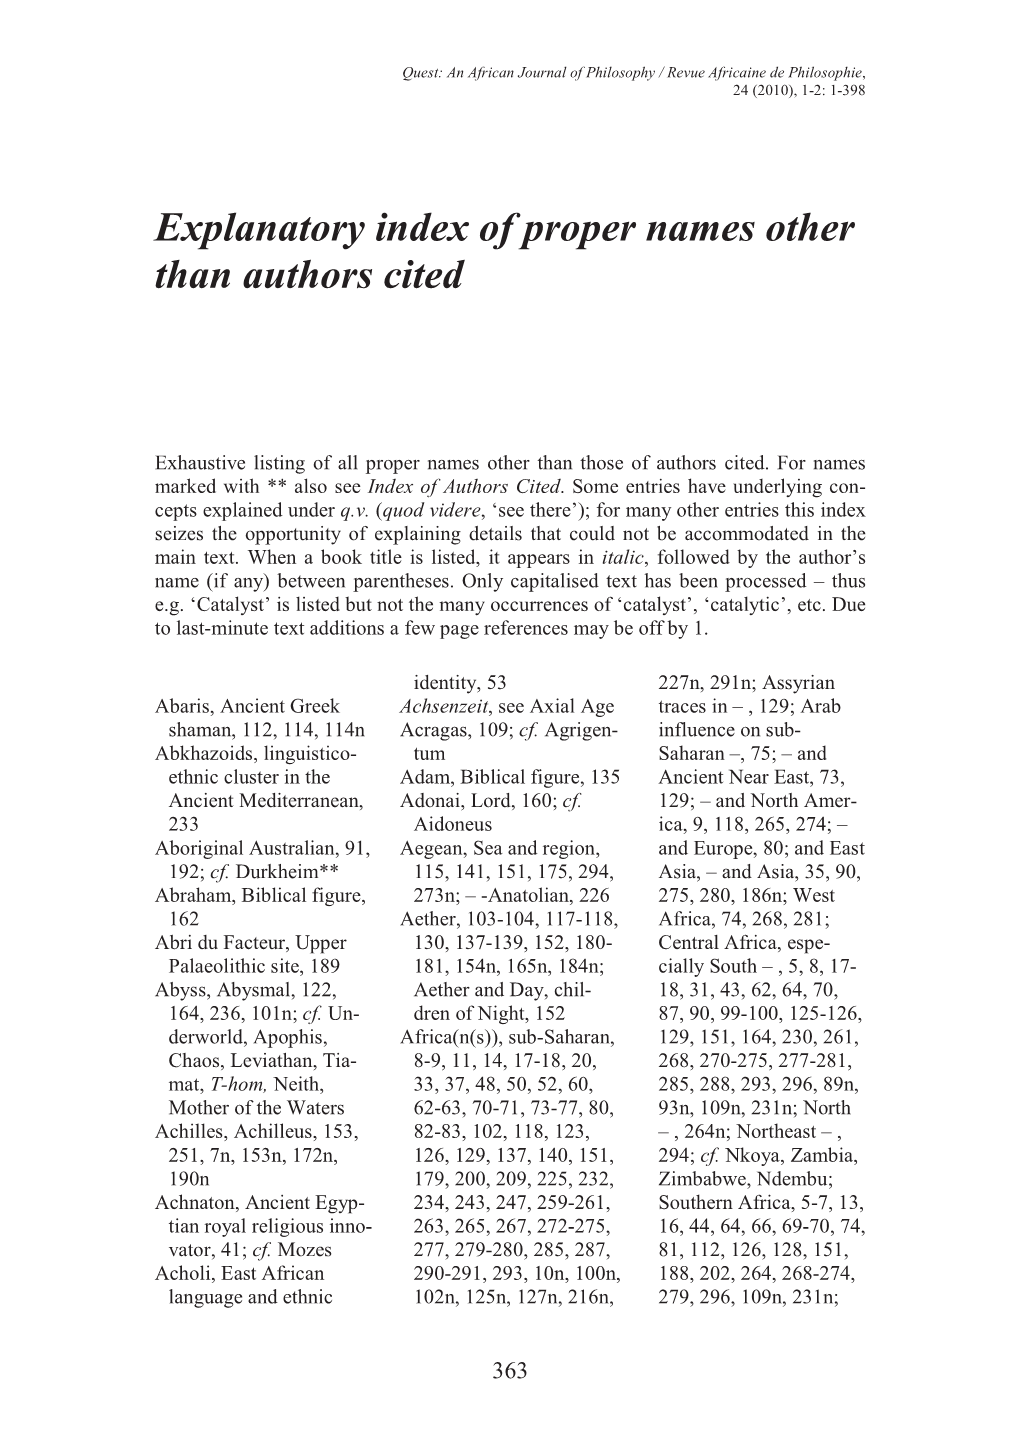 Explanatory Index of Proper Names Other Than Authors Cited